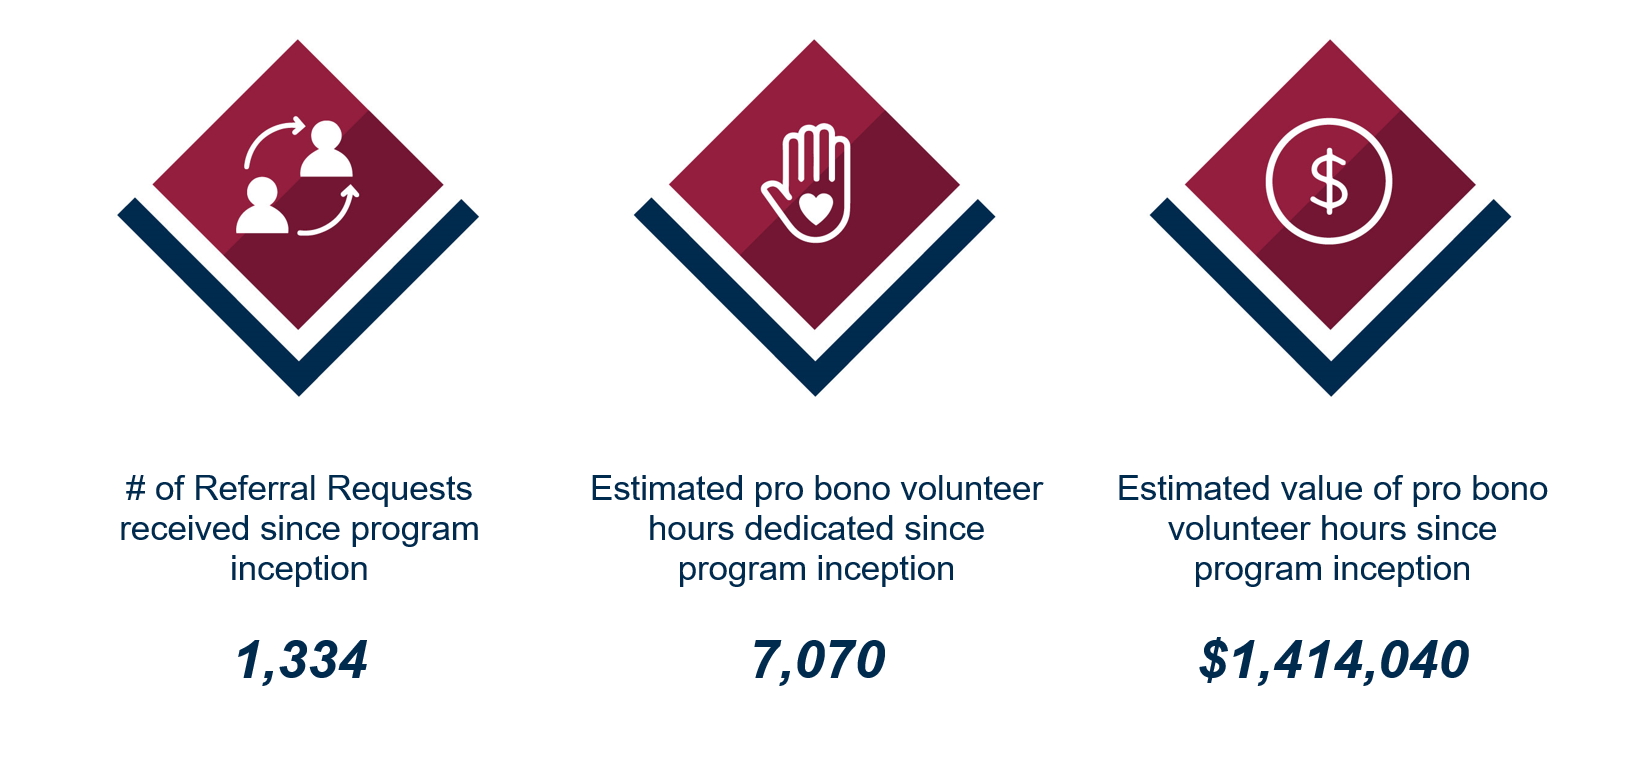 Military Matters program highlights of the number of referrals received, hours dedicated to volunteering, and the estimate value of those hours